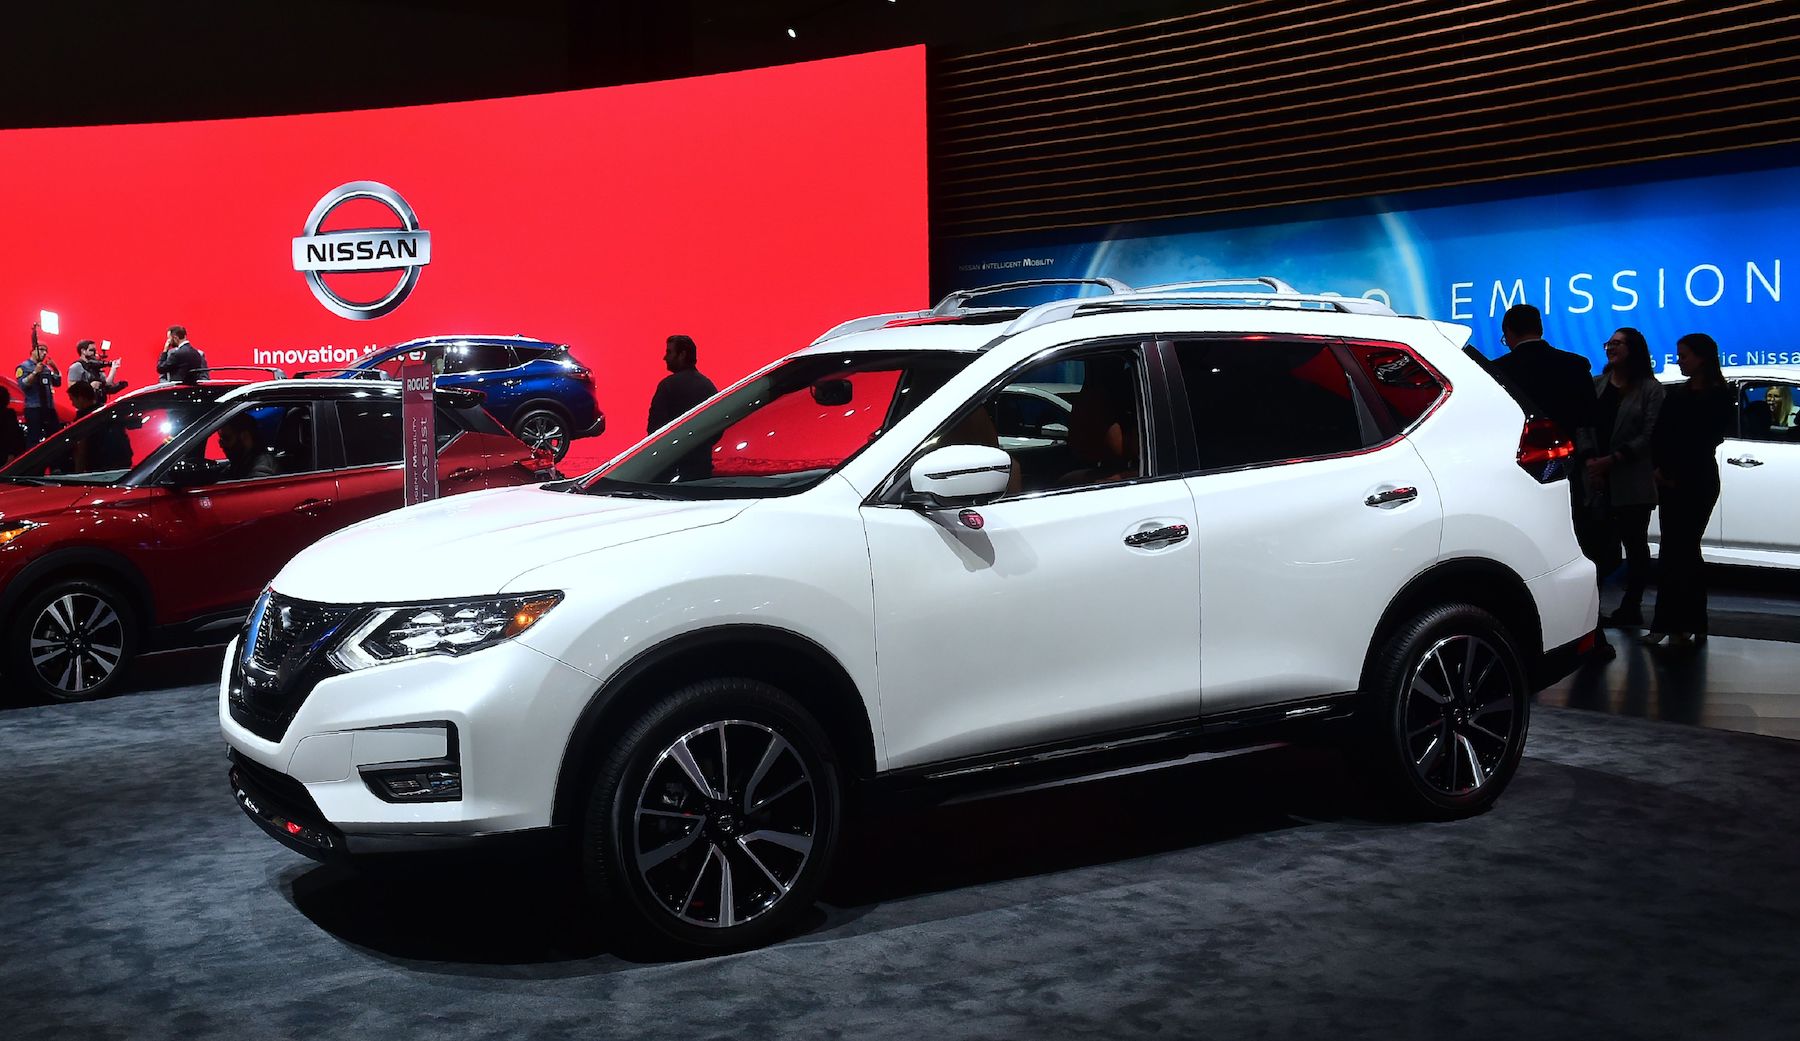 New models of the Nissan Rogue on display in Los Angeles, California on November 29, 2018 at Automobility LA